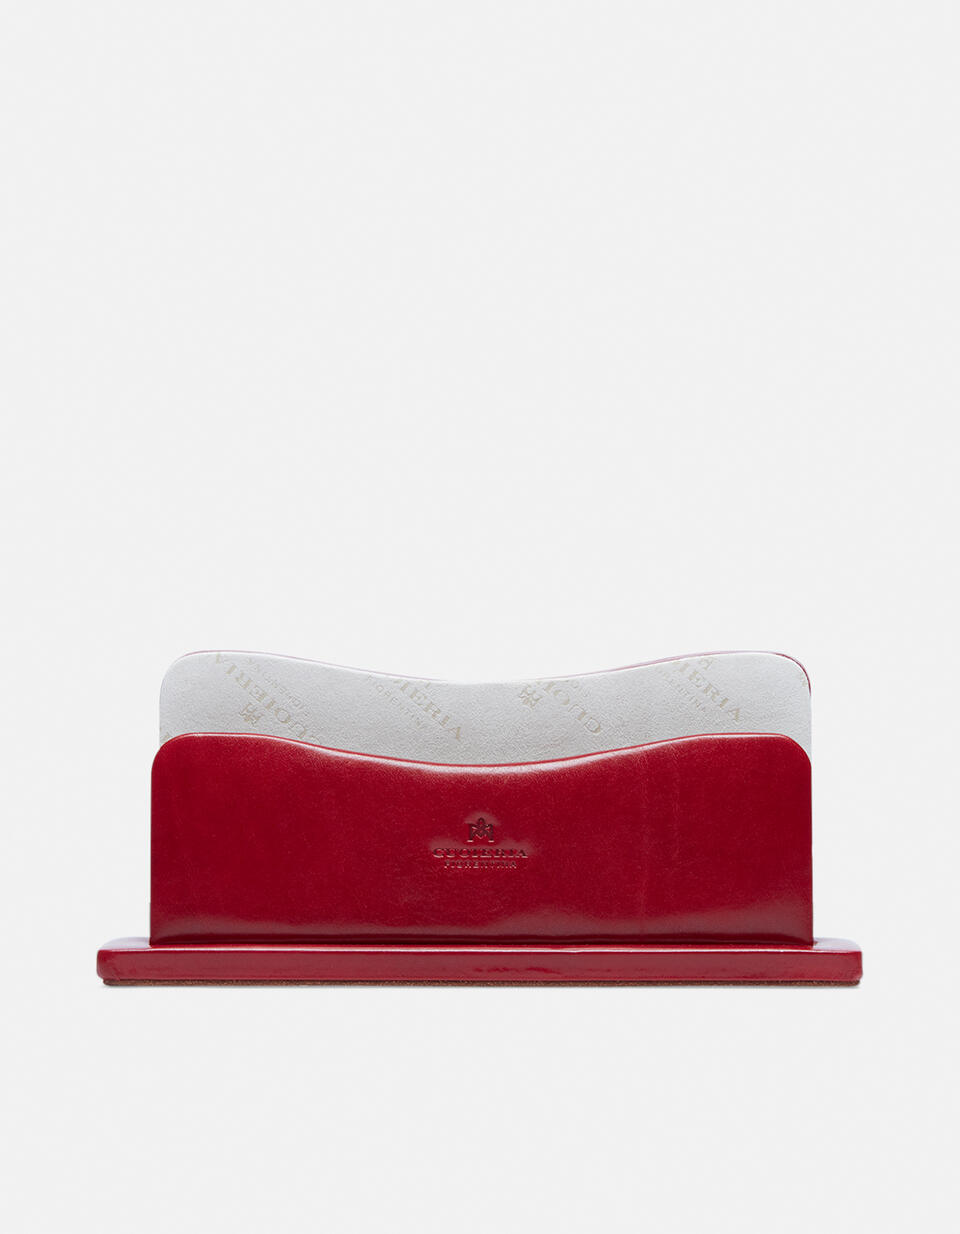 Vegetable tanned leather letter holder - Office | Accessories ROSSO - Office | AccessoriesCuoieria Fiorentina